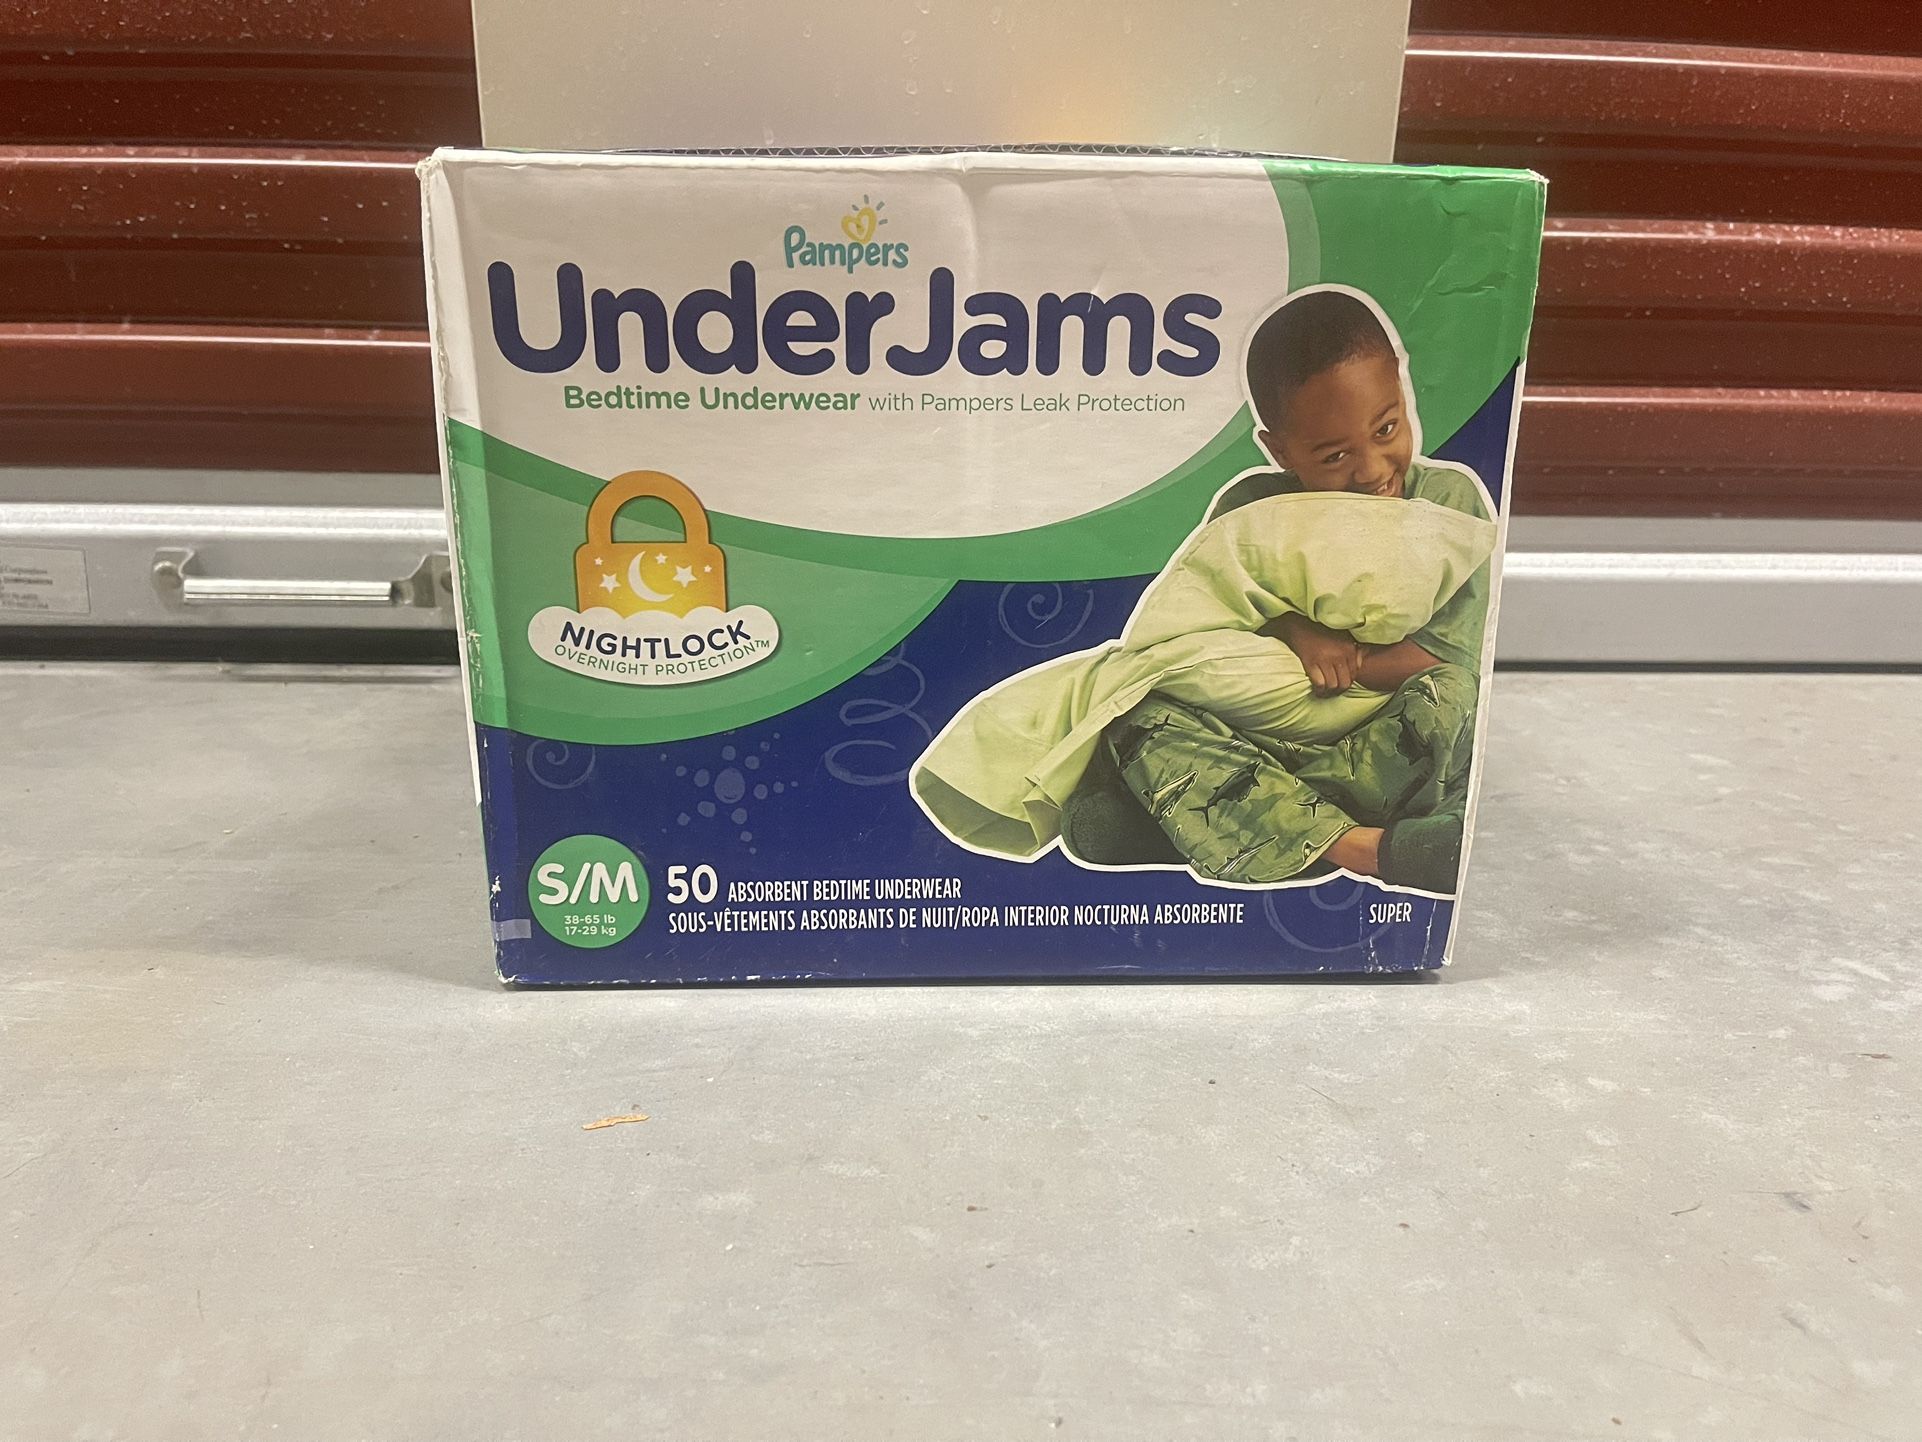 New Box Of Pampers Underjams S/M 38-65 lbs 50 Count For Nighttime Bedwetting